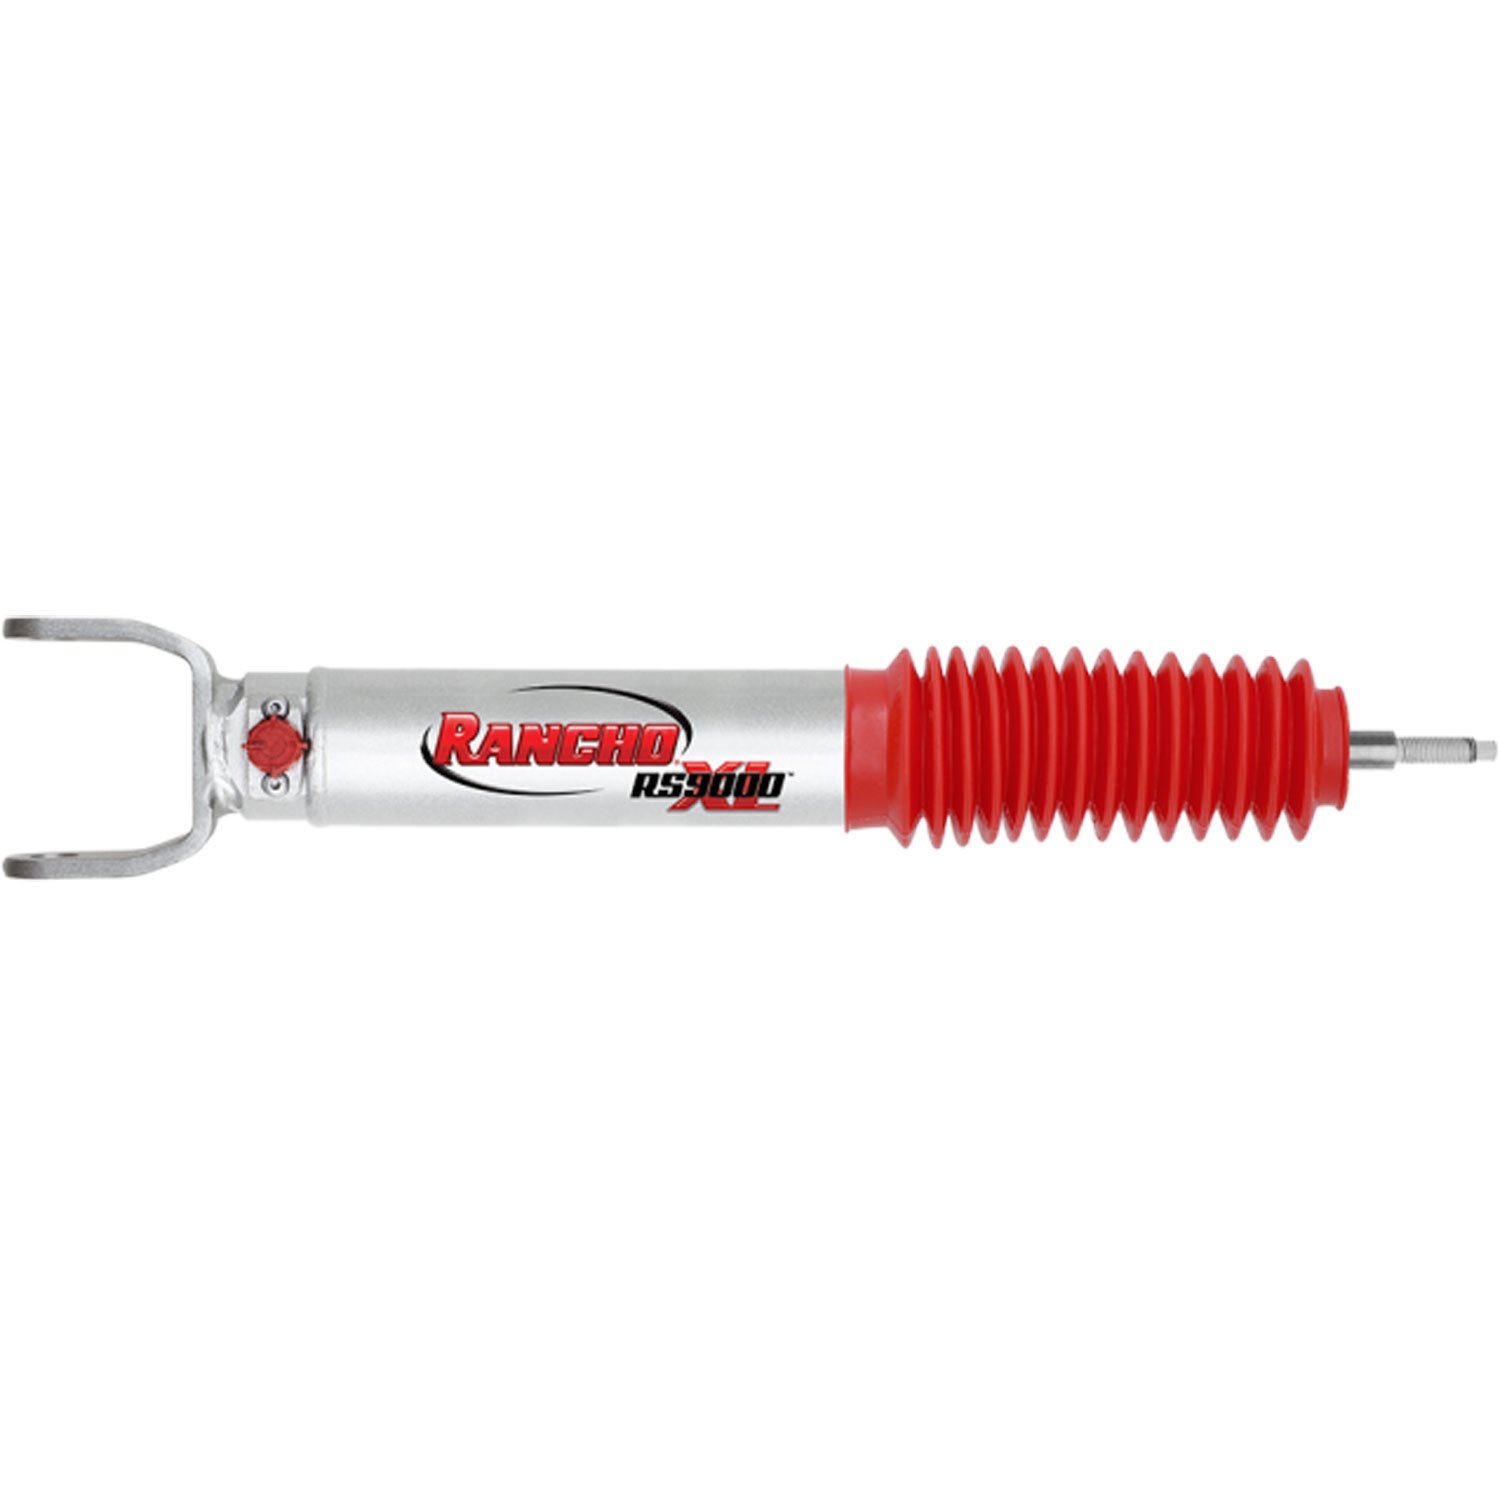 RS9000XL Front Shock Absorber Fits GM 1500 Pickups, Fullsize SUVs and Chevy Avalanche